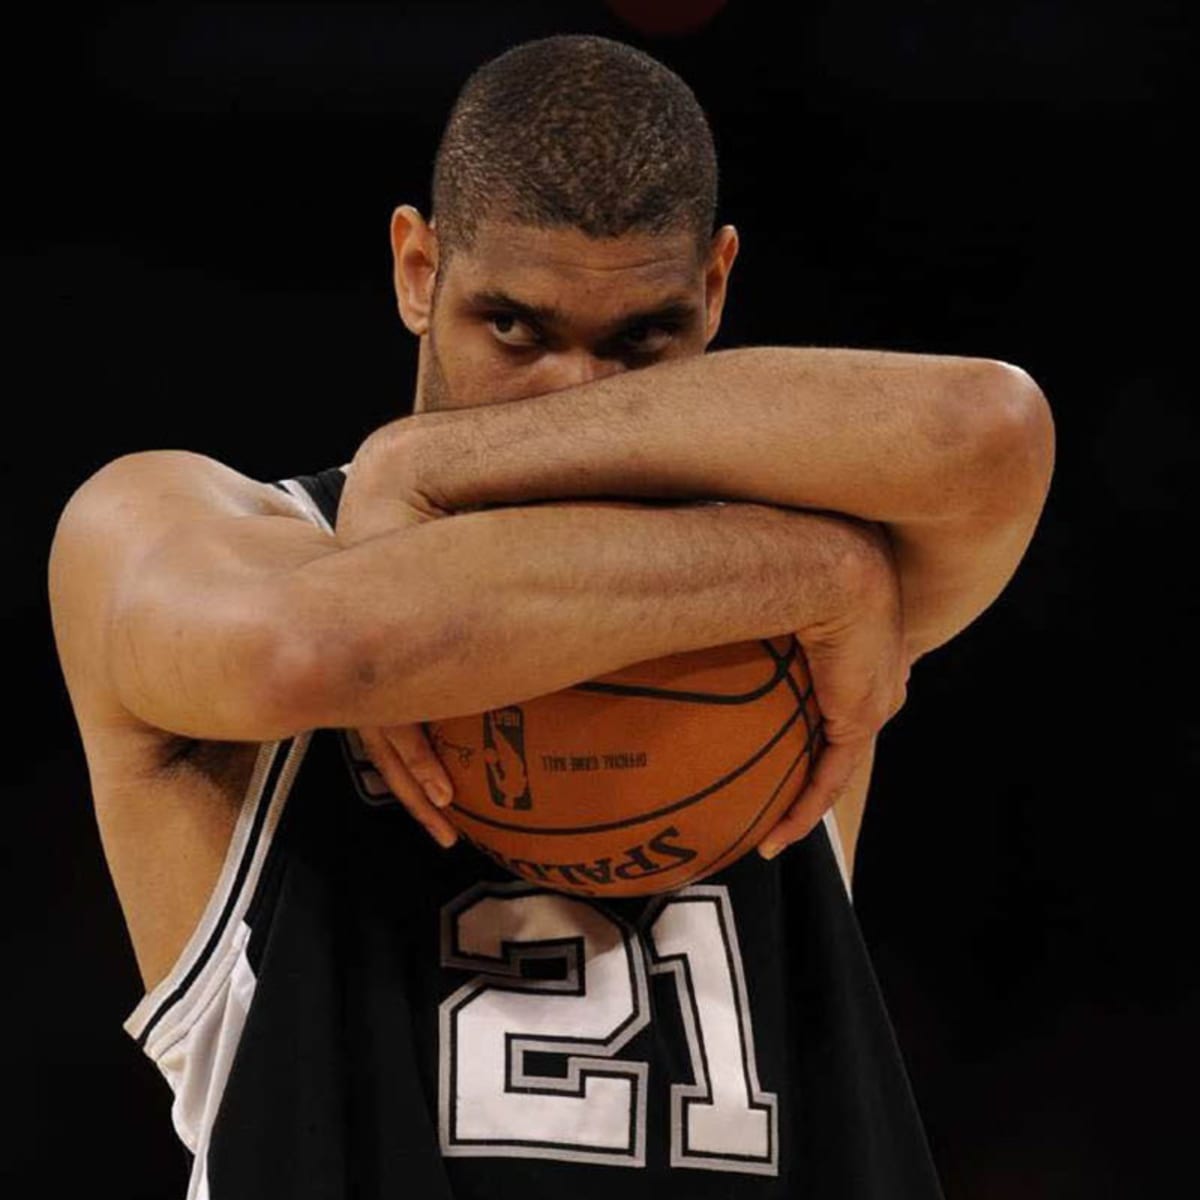 Spurs' Popovich believed he was leaving basketball once Tim Duncan